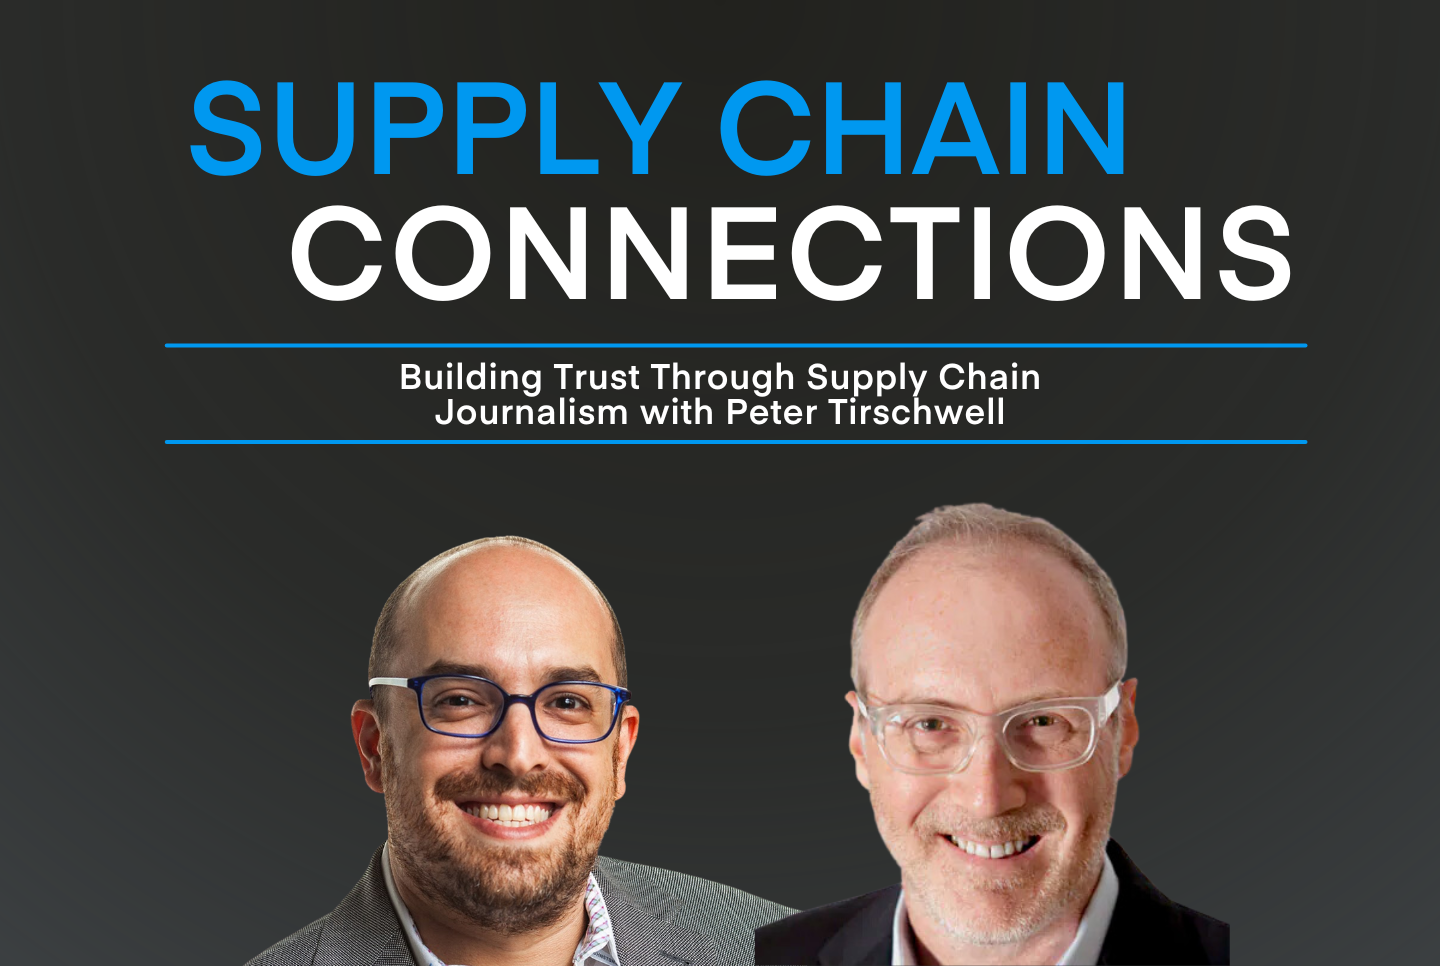 Building Trust Through Supply Chain Journalism with Peter Tirschwell